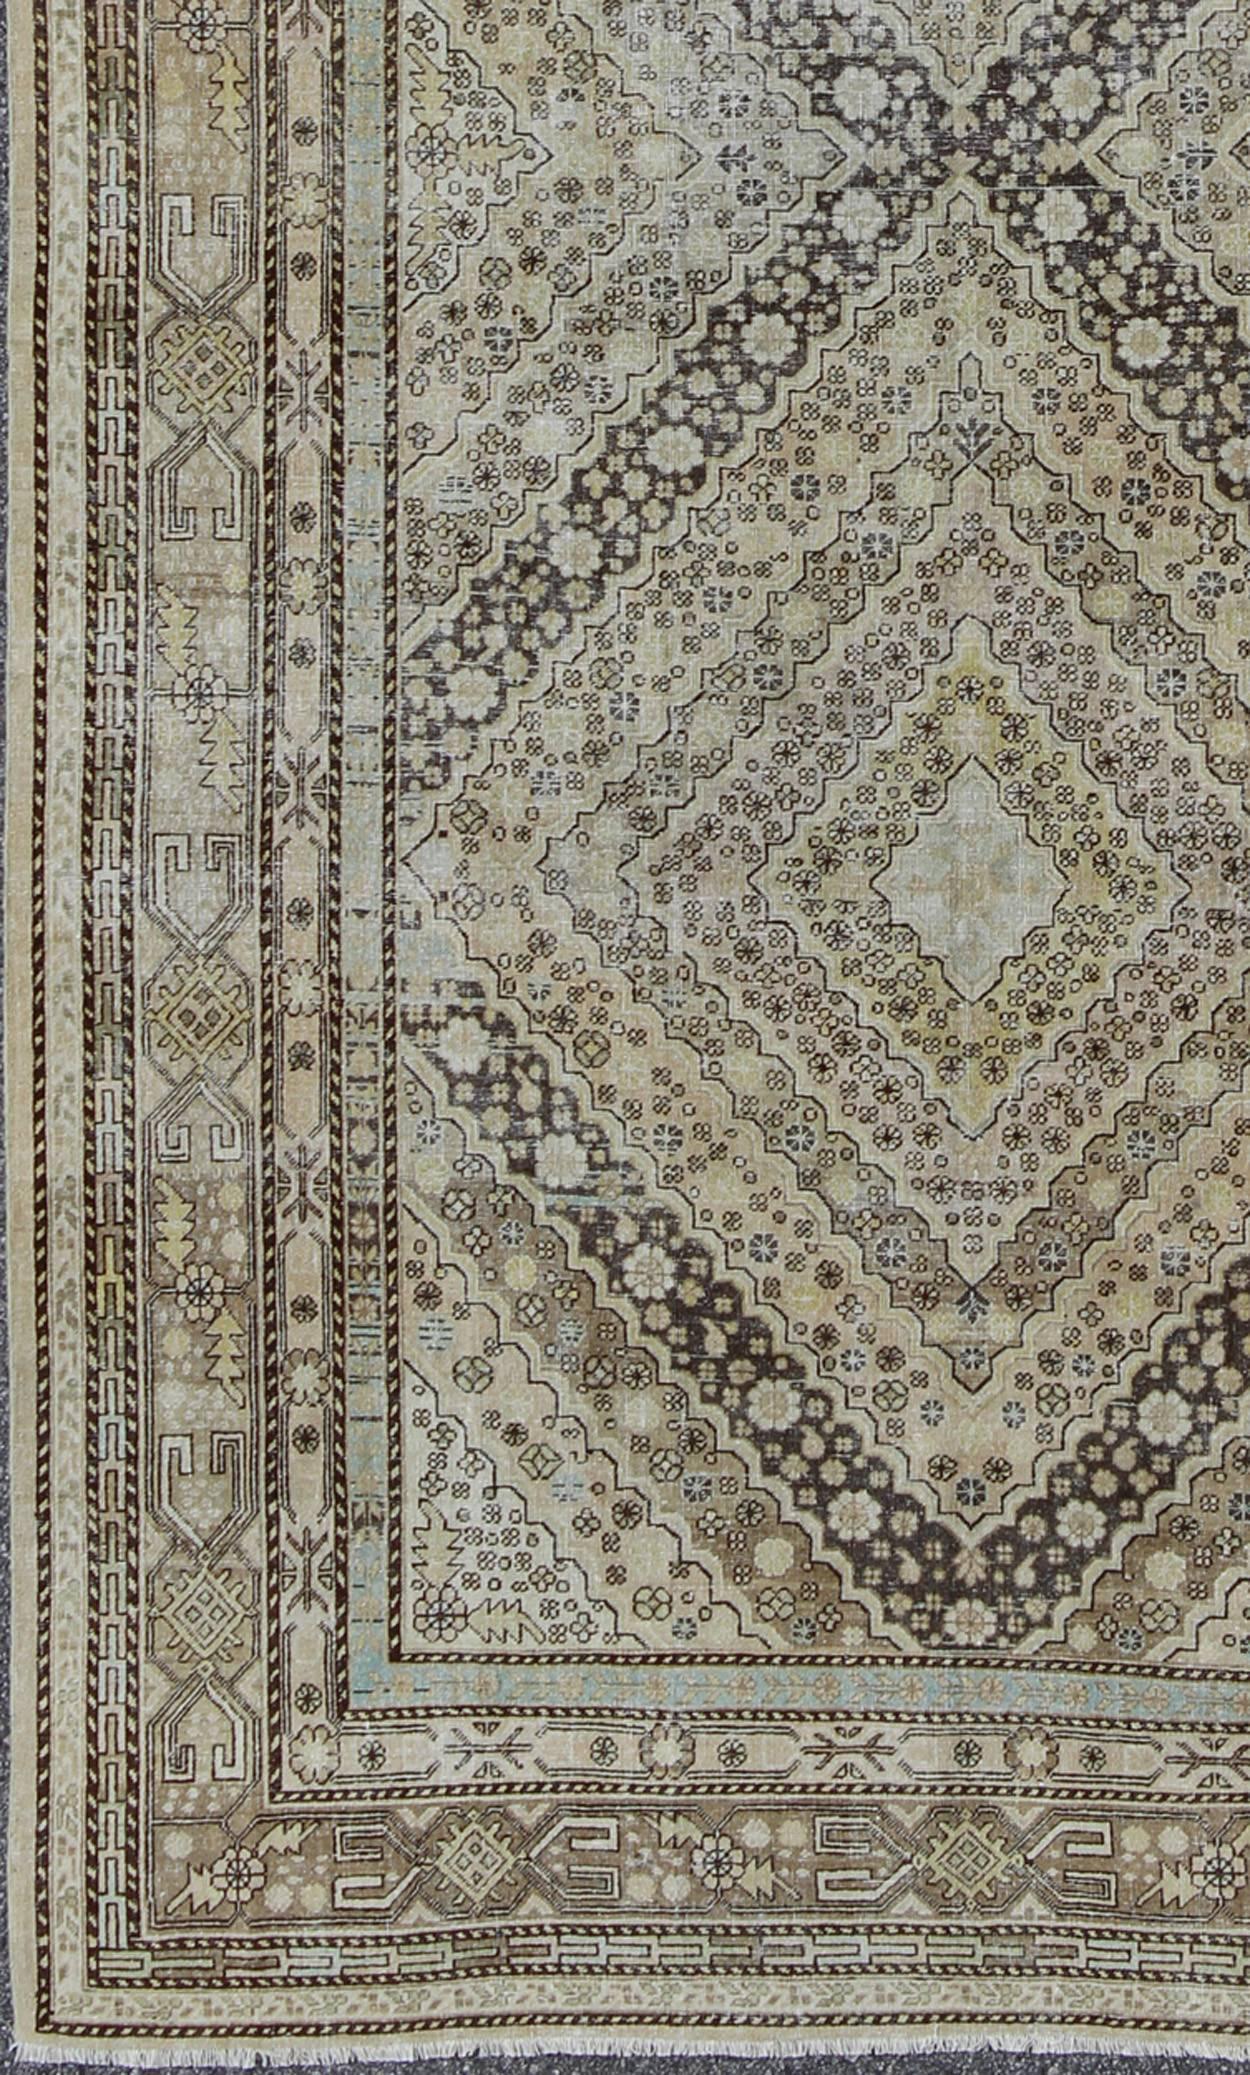 Antique Turkestanian Khotan rug with paired diamond geometric medallions, rug gld-8495, country of origin / type: East Turkestan / Khotan, circa 1910.

This delicately rendered antique Khotan rug was handcrafted in Turkestan during the early part